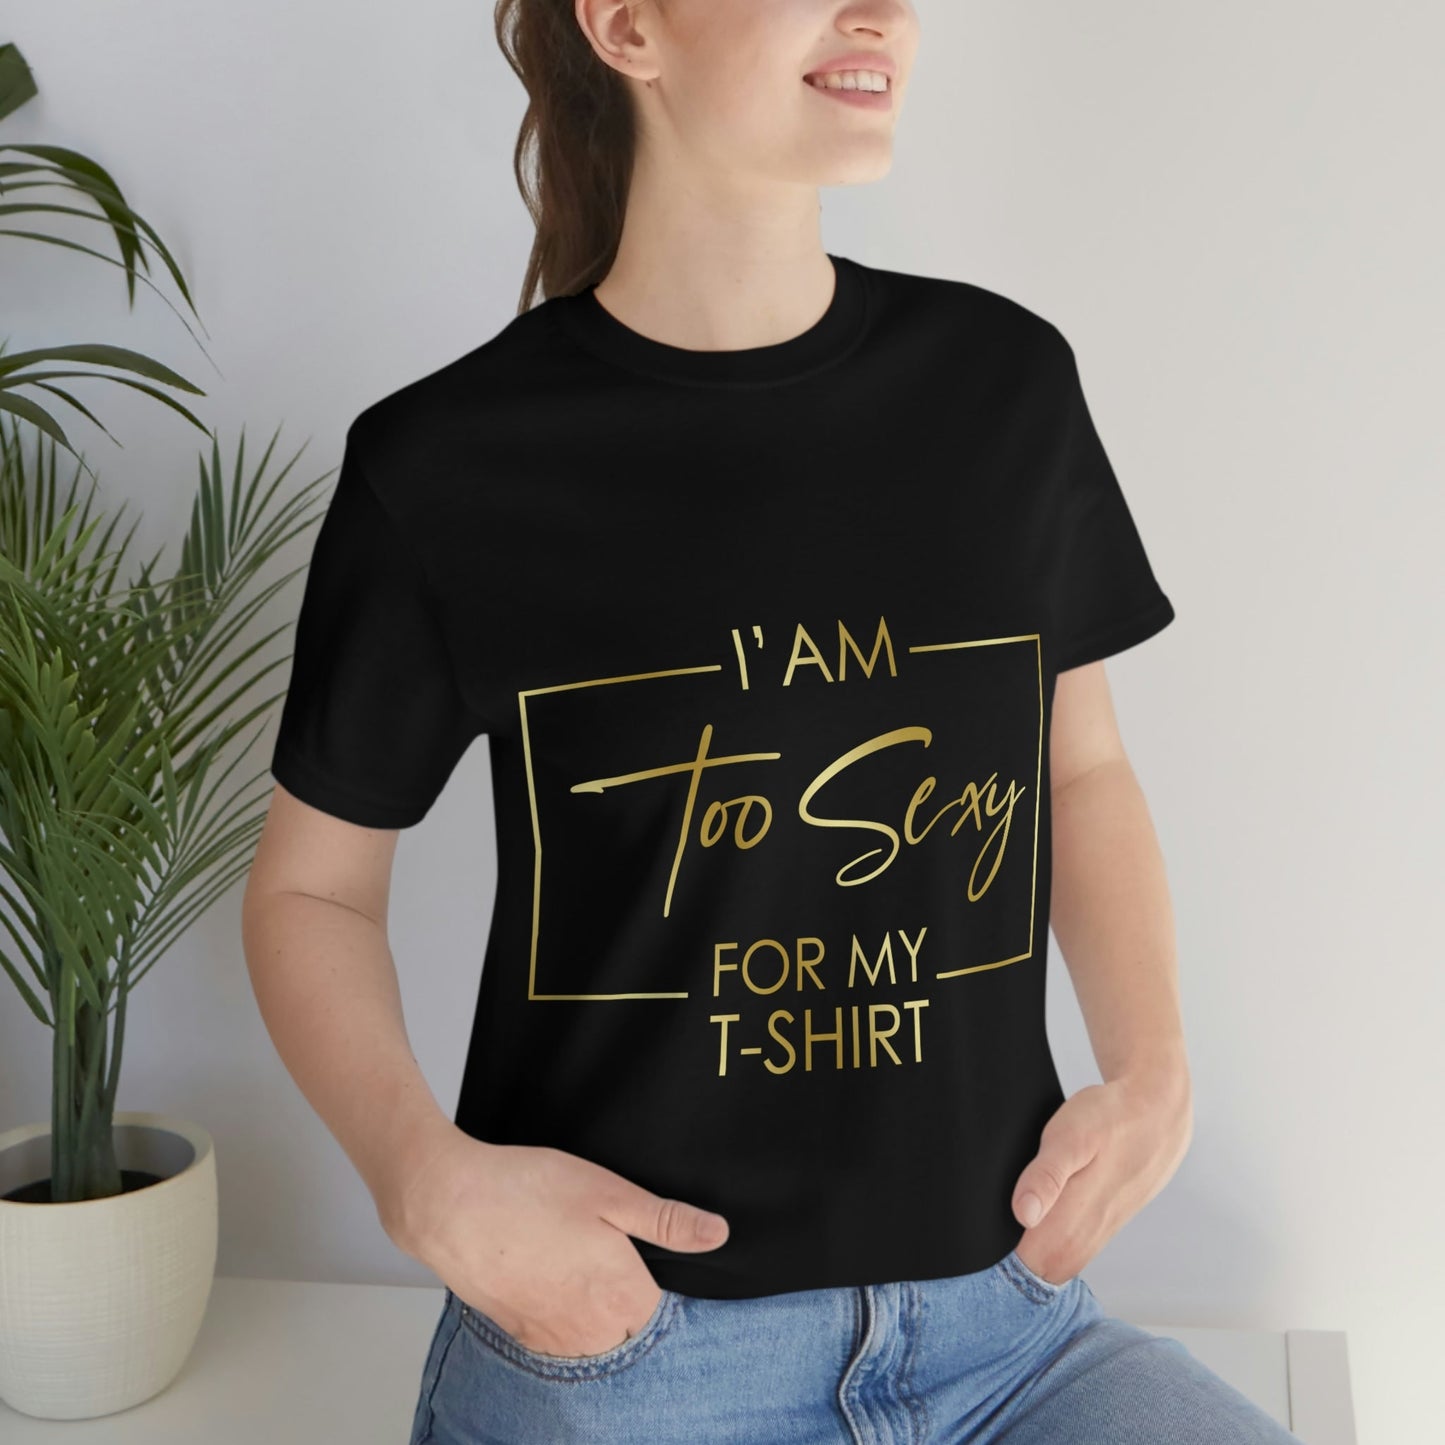 I Am To Sexy For T-shirt Self Love Funny Quotes Unisex Jersey Short Sleeve T-Shirt Ichaku [Perfect Gifts Selection]